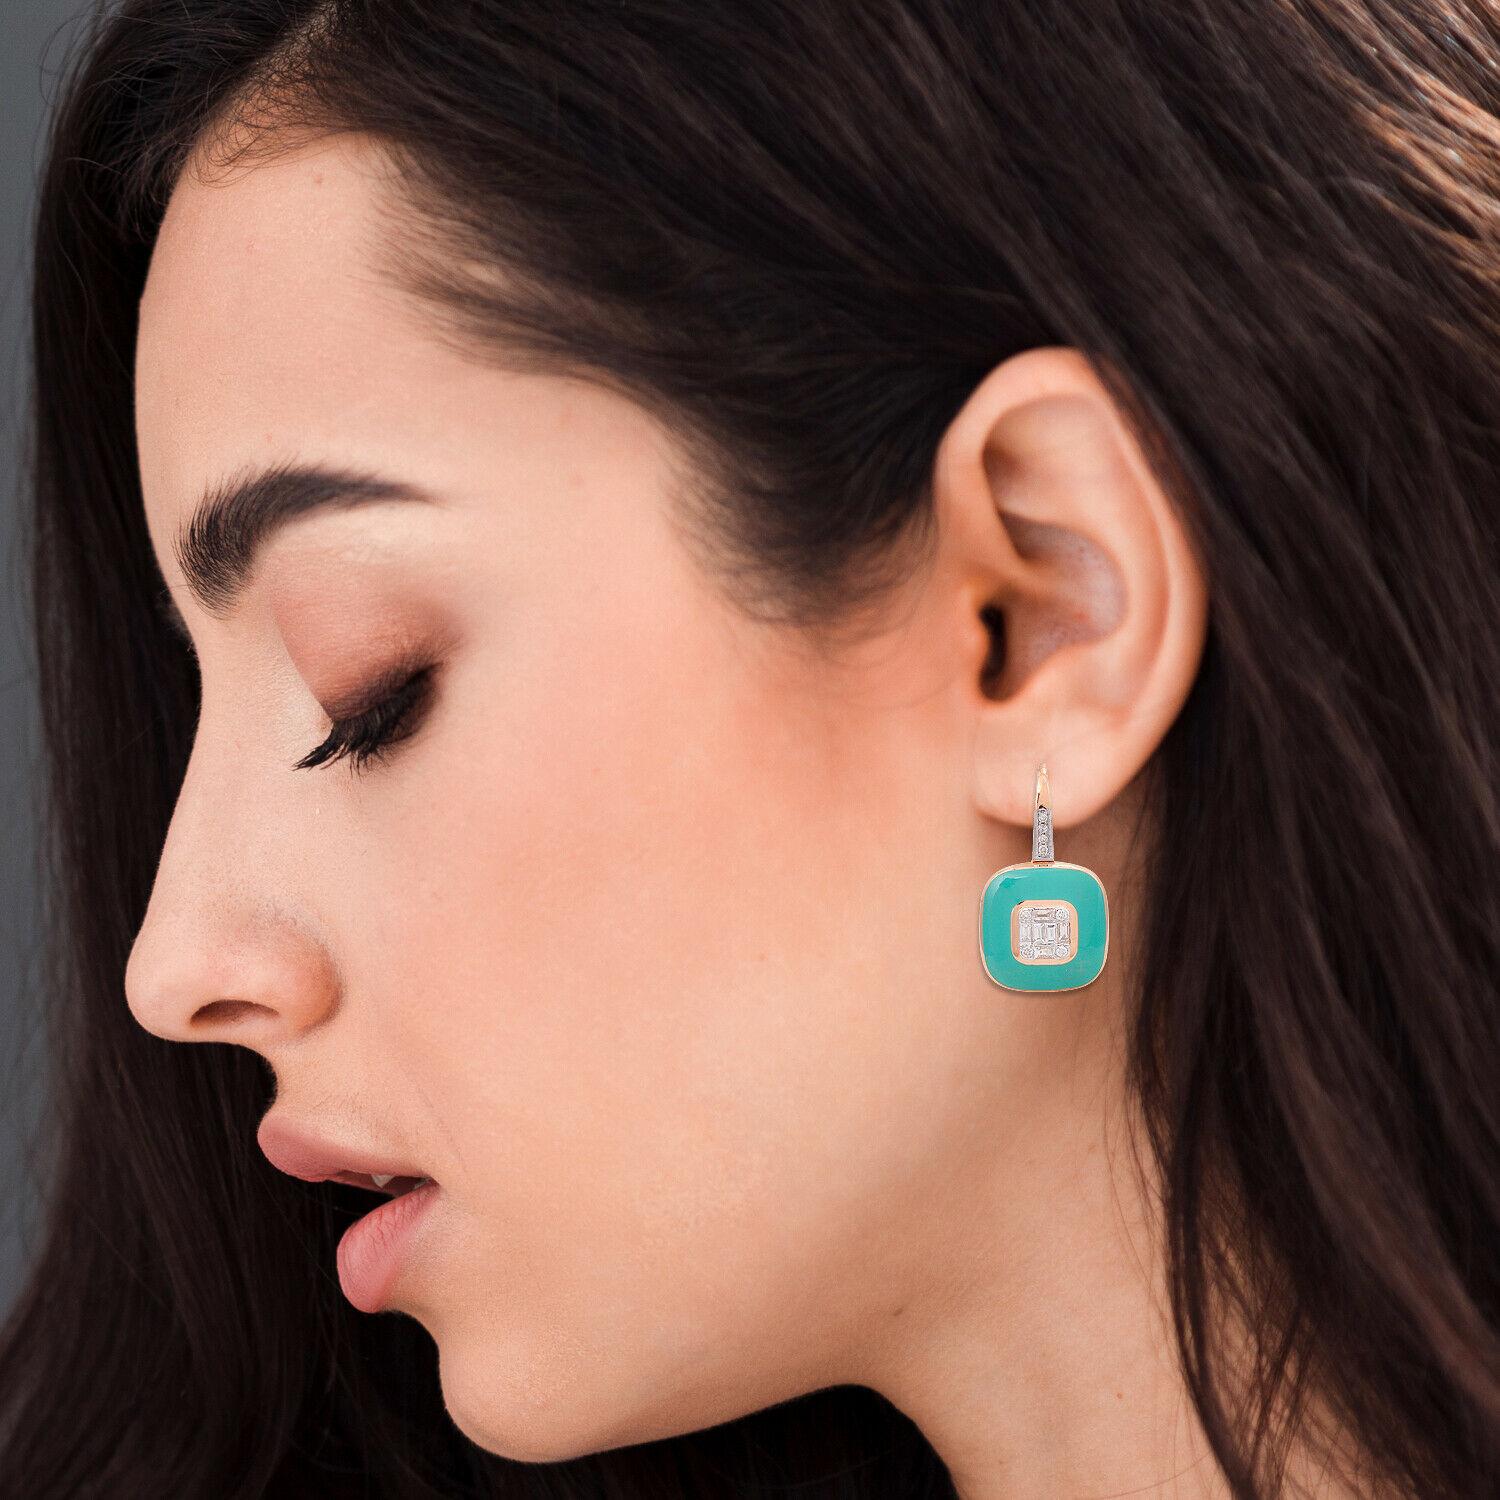 This turquoise enamel earrings are crafted from 18-karat rose gold & set with .95 carats of sparkling diamonds. See matching necklace that compliments with this necklace.

FOLLOW MEGHNA JEWELS storefront to view the latest collection & exclusive